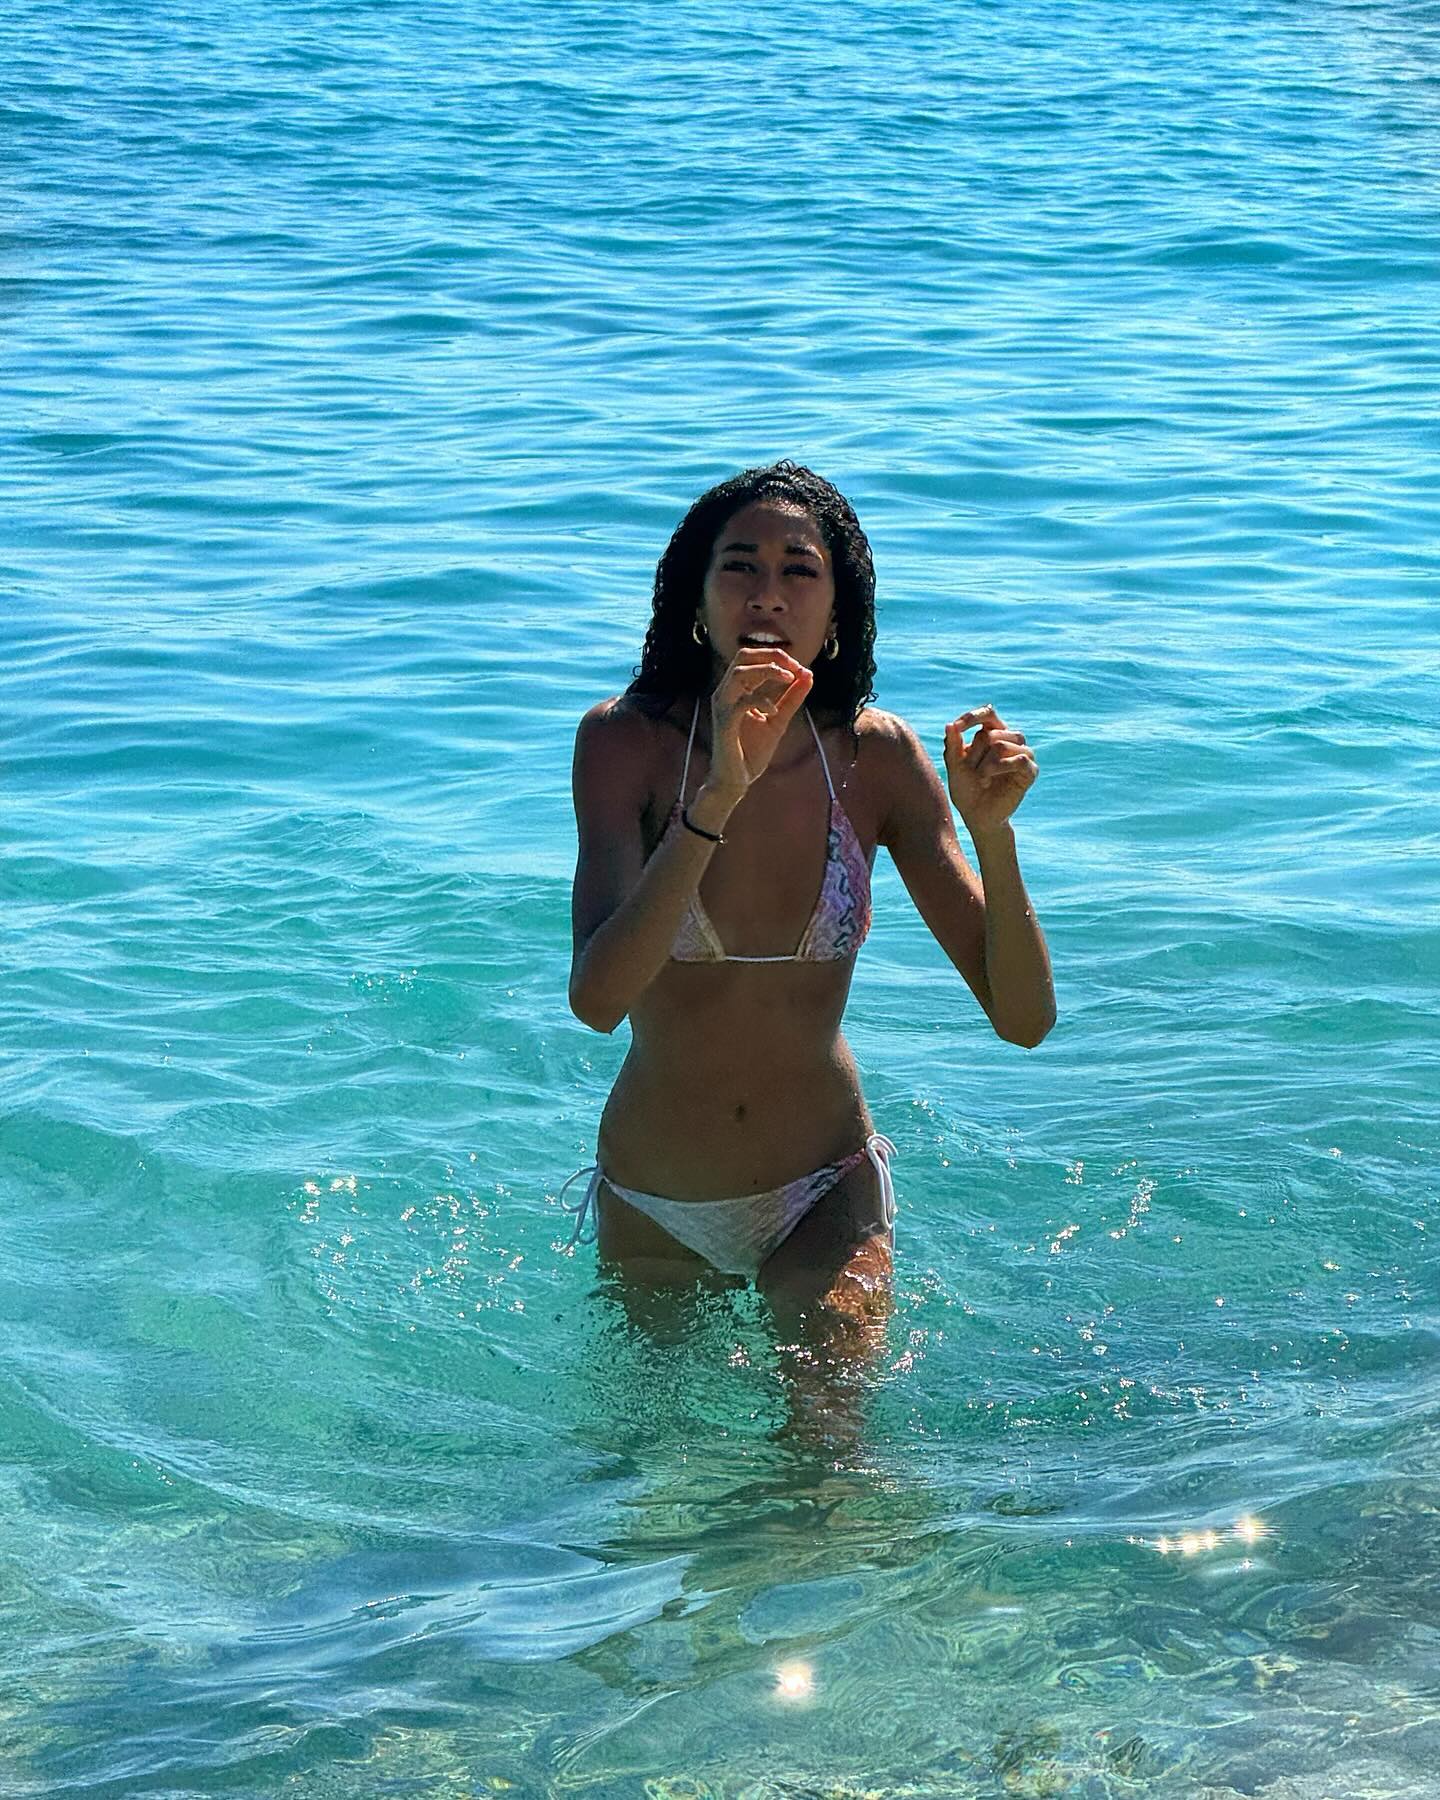 The young model shared photos from St. Barts with her much older beau